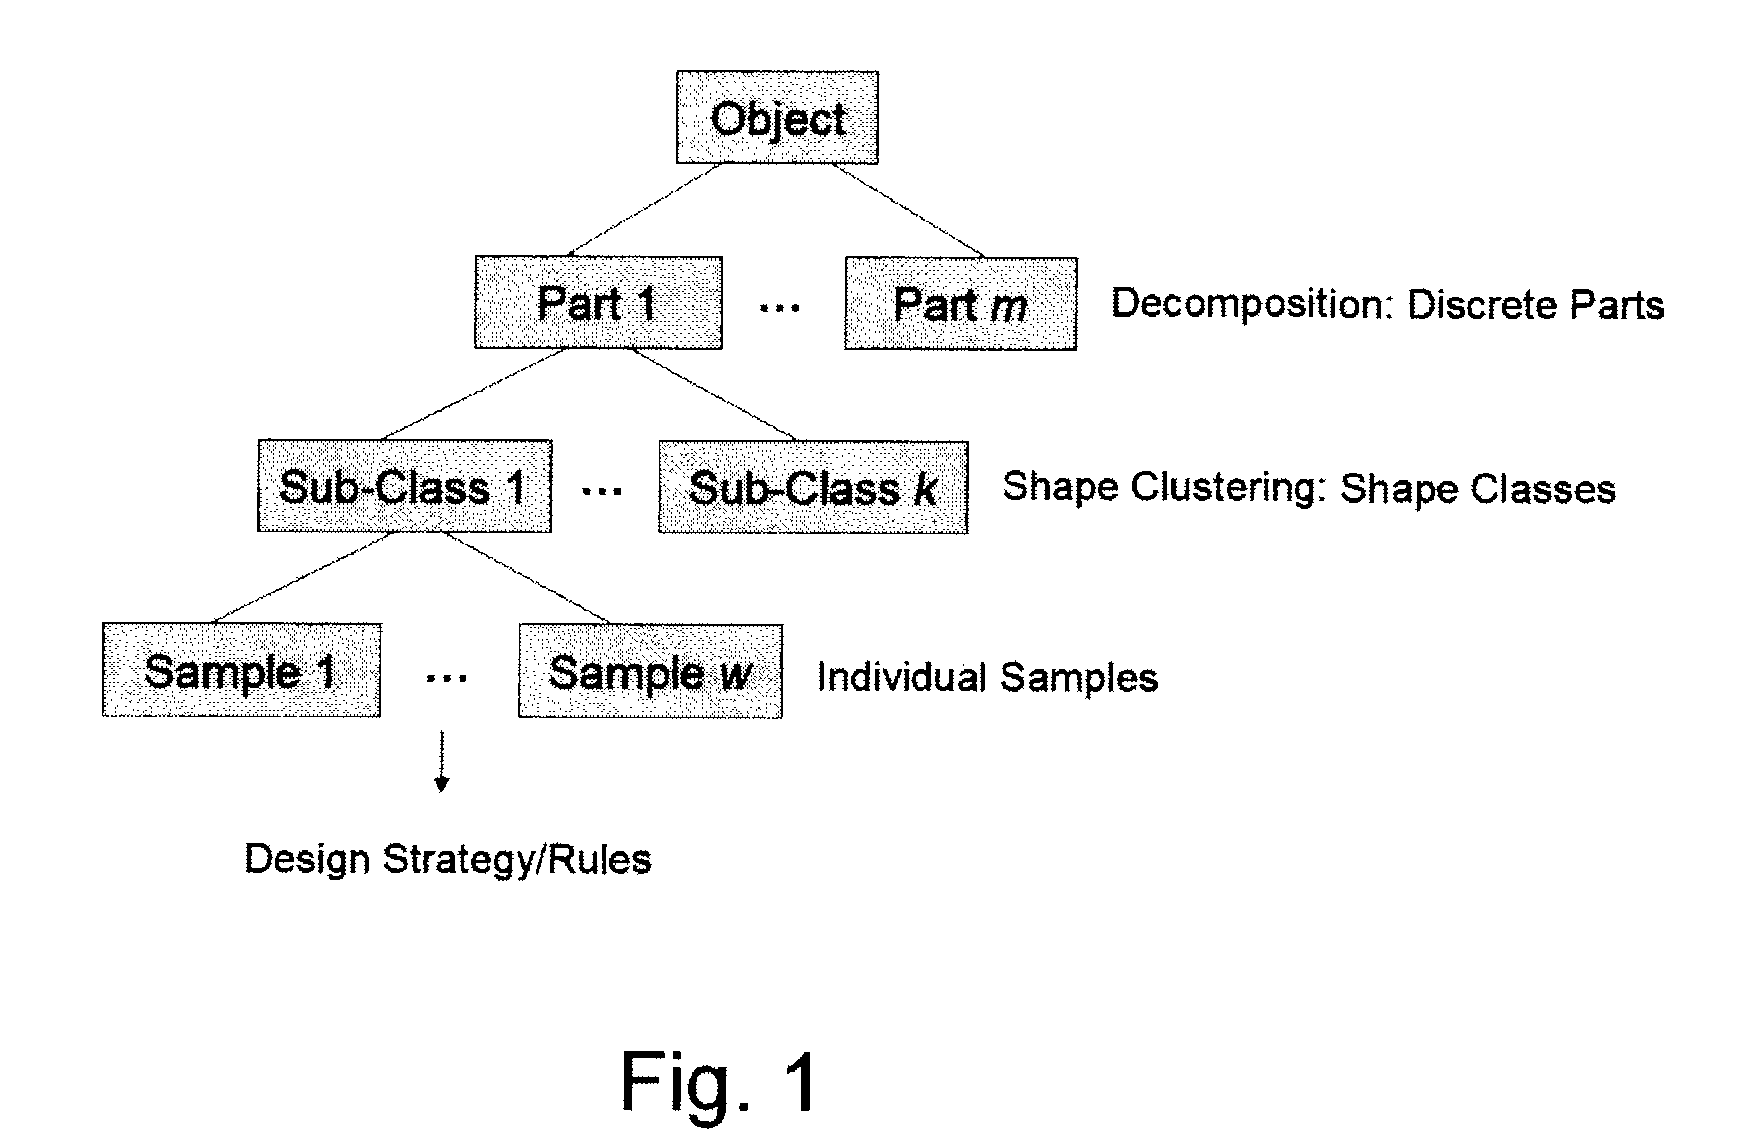 System and method for prototyping by learning from examples wherein a prototype is calculated for each shape class cluster